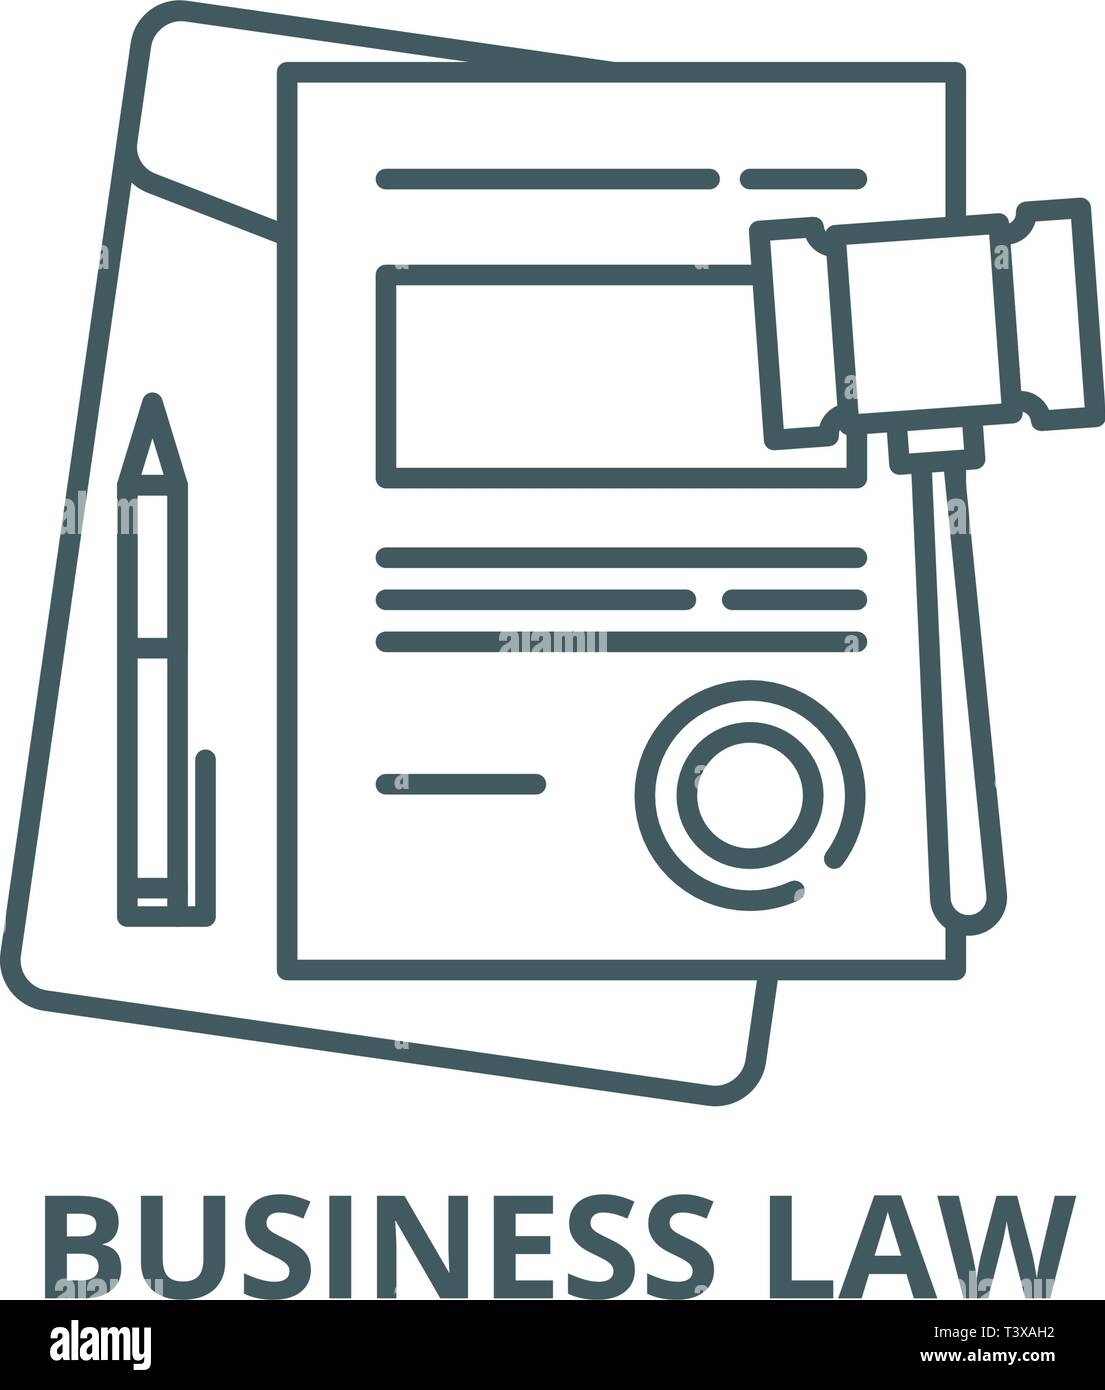 Business Law Line Icon Vector Business Law Outline Sign Concept Symbol Flat Illustration Stock Vector Image Art Alamy